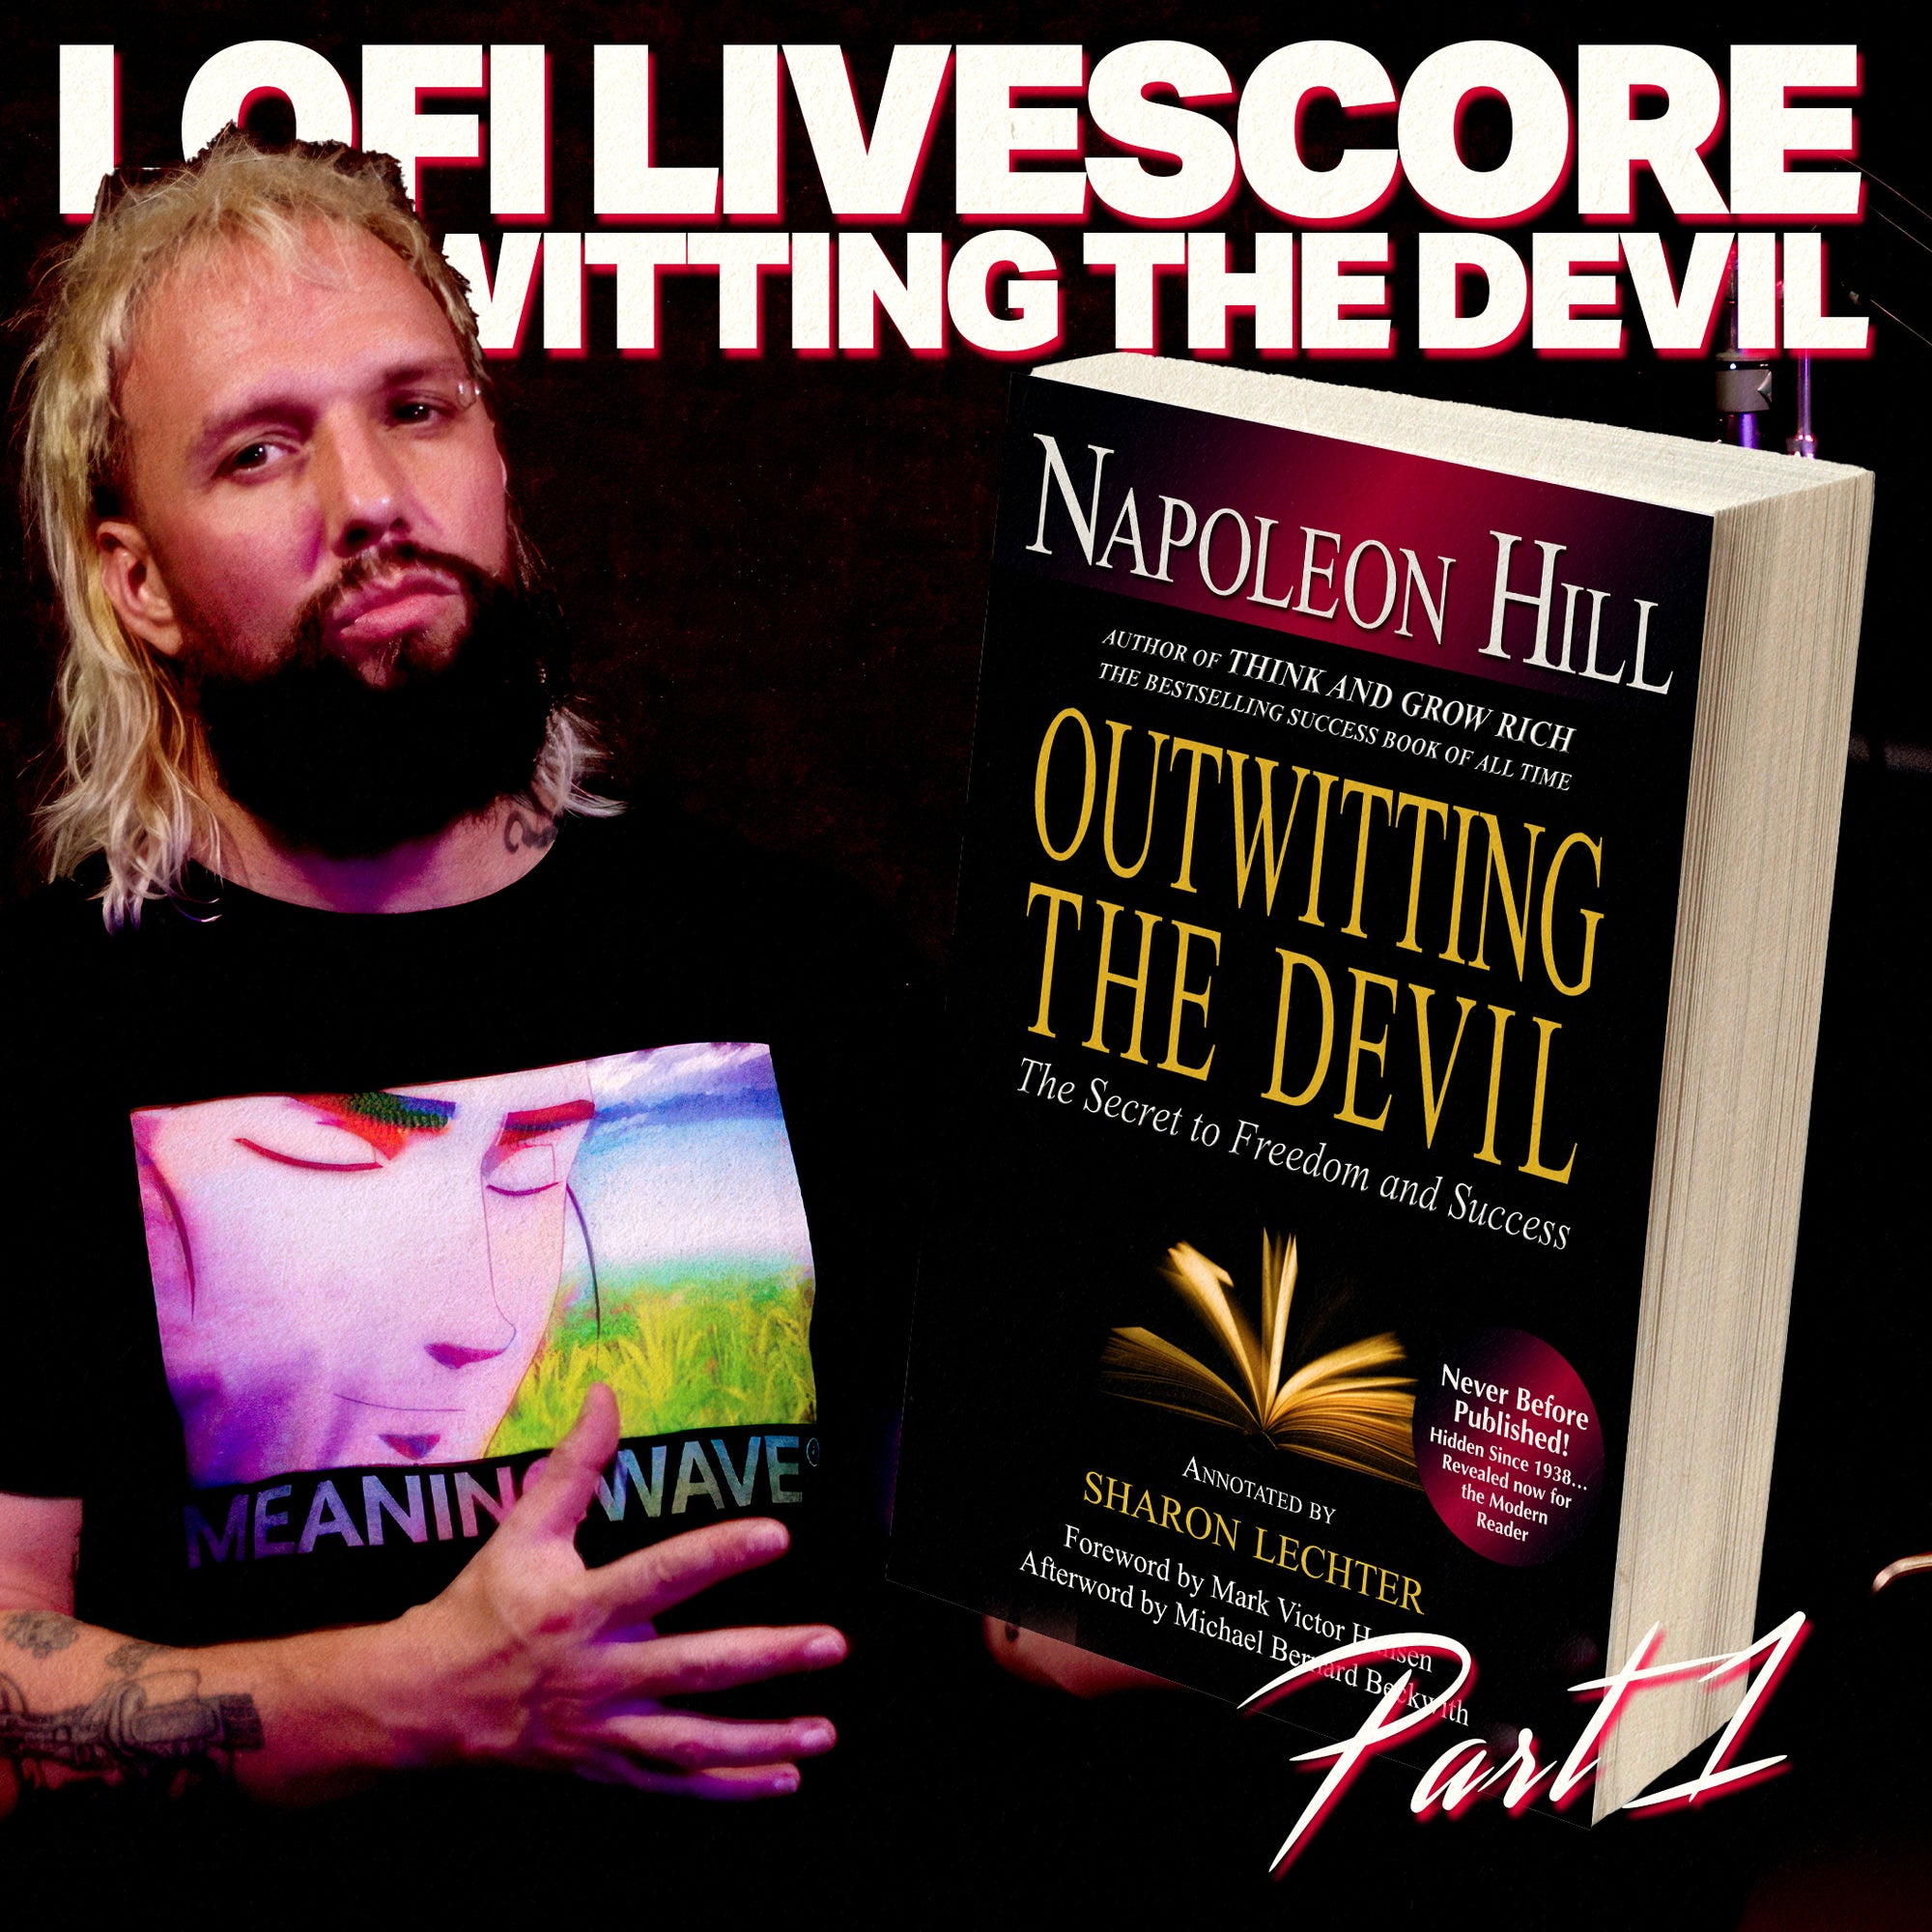 OUTWITTING THE DEVIL 👿 PART 1 | MEANINGSTREAM 457 | STREAM